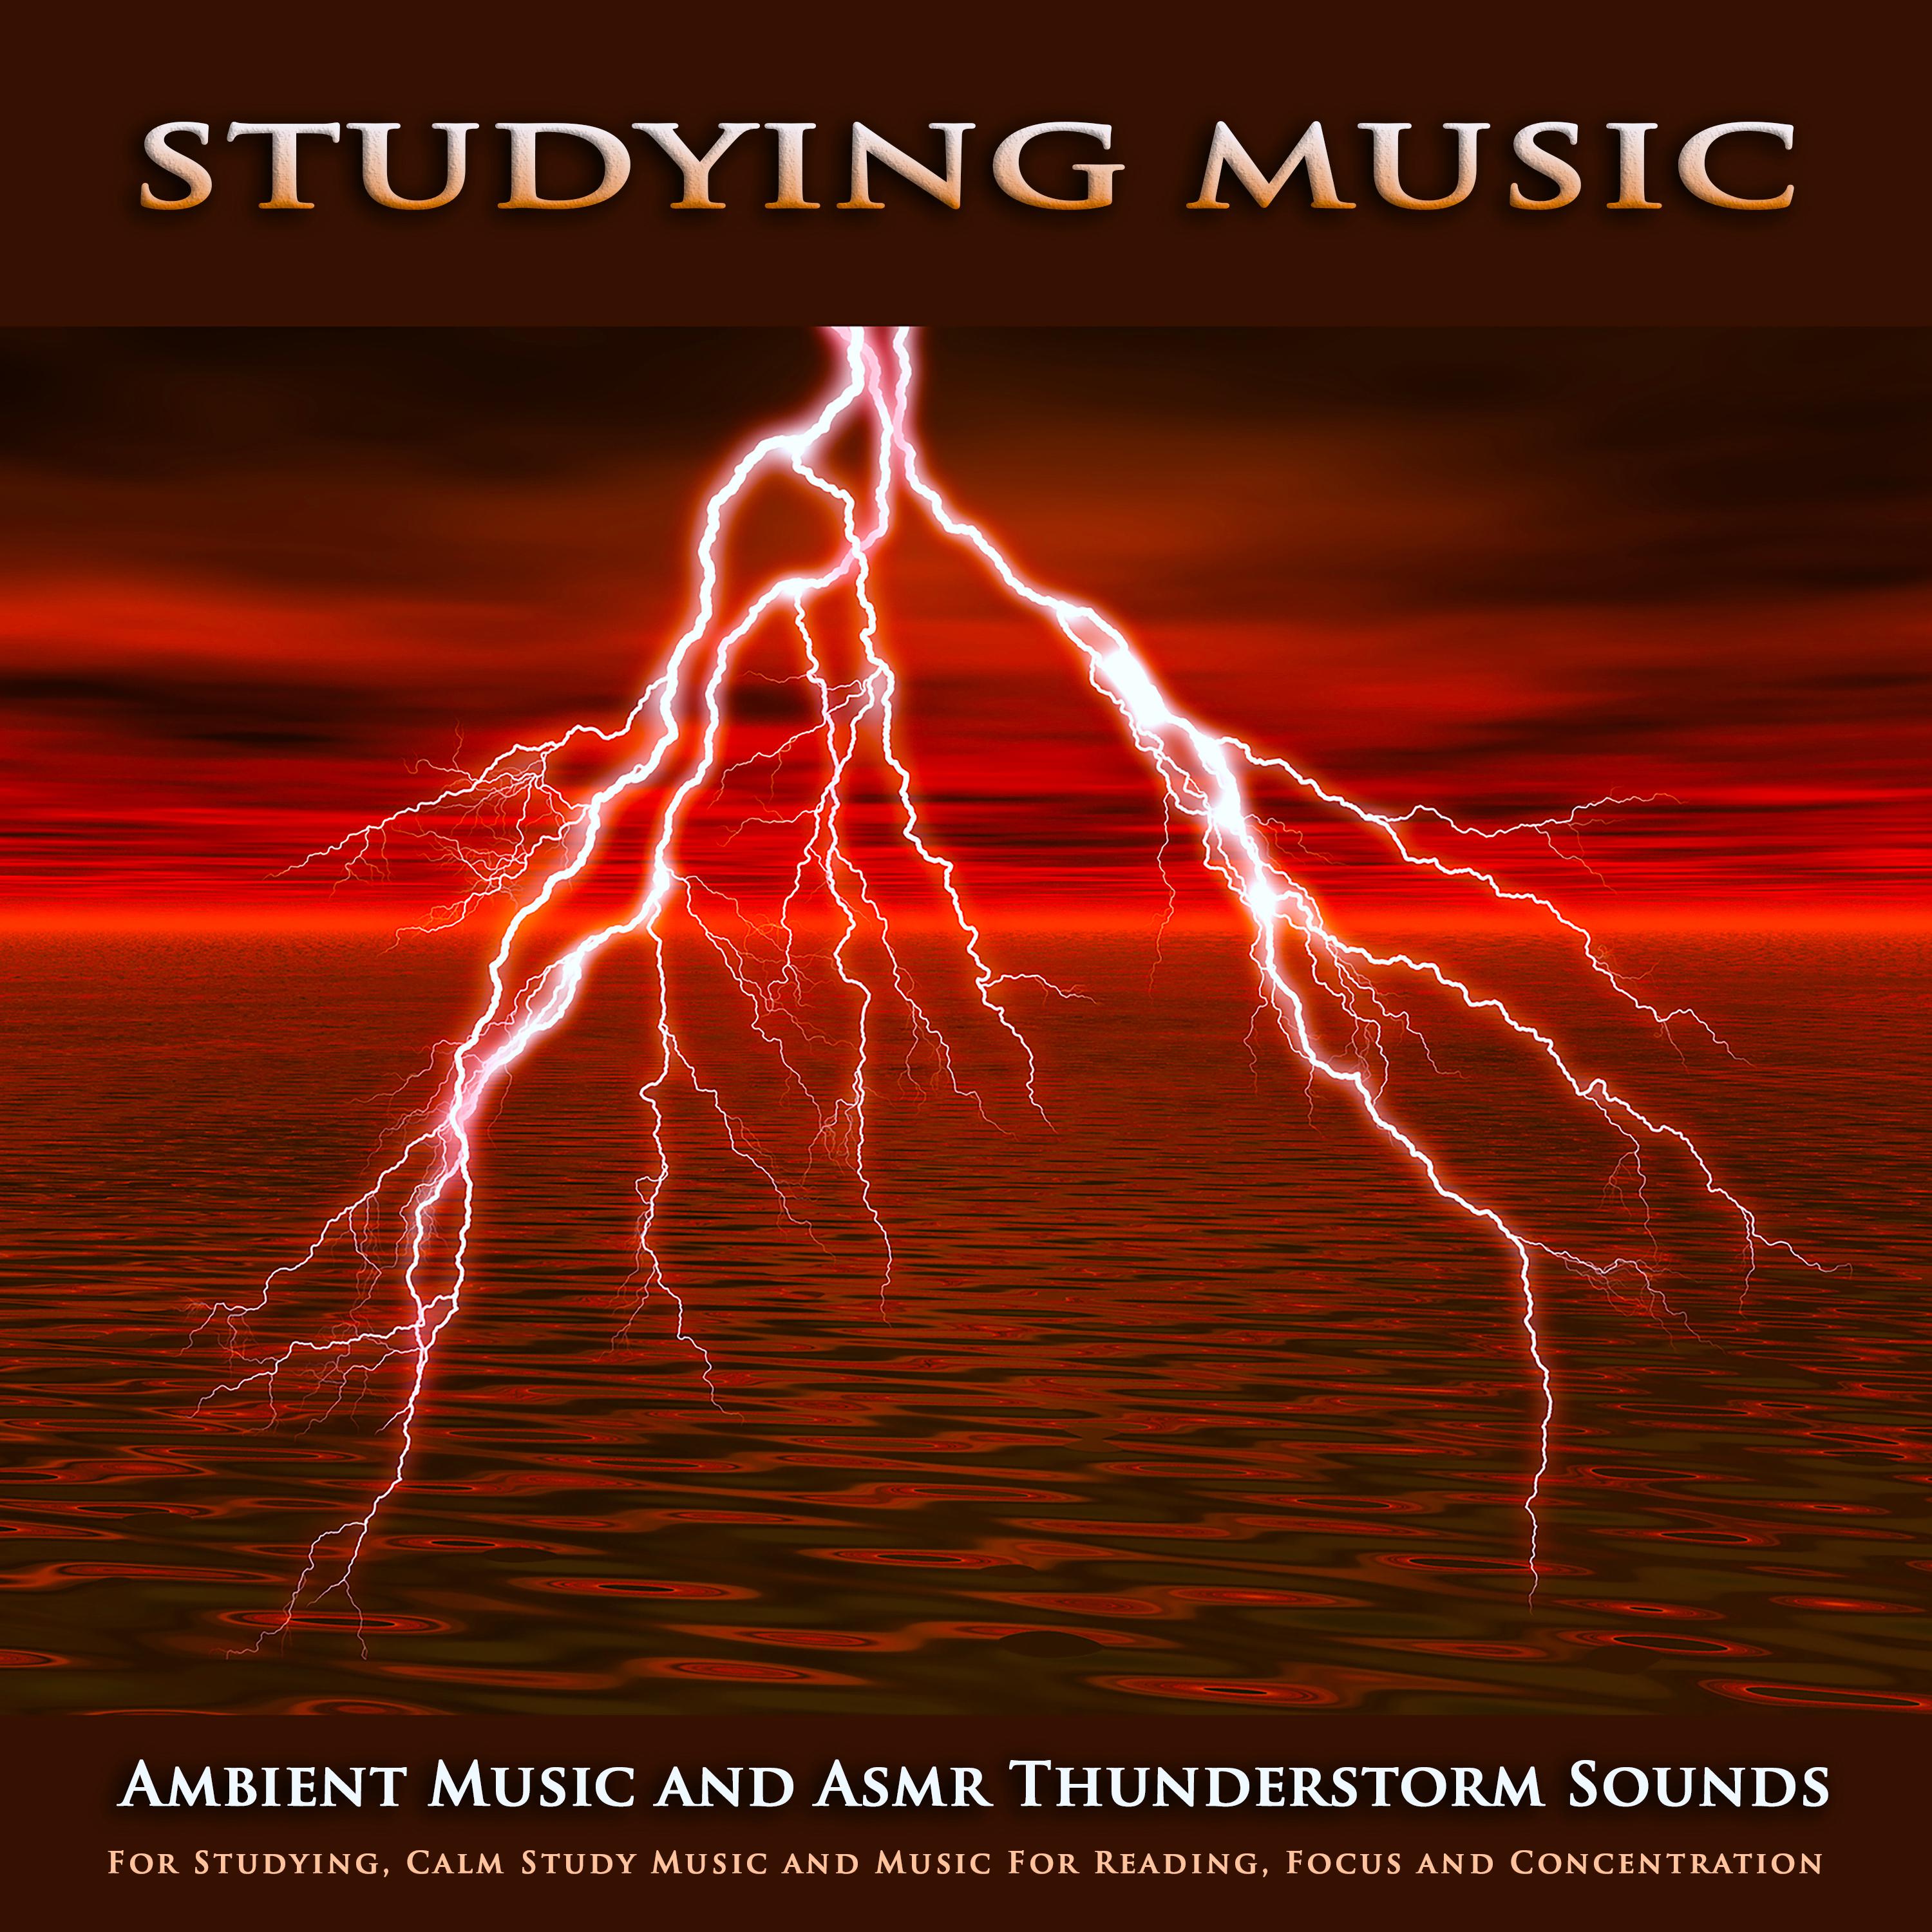 Studying Music: Ambient Music and Asmr Thunderstorm Sounds For Studying, Calm Study Music and Music For Reading, Focus and Concentration